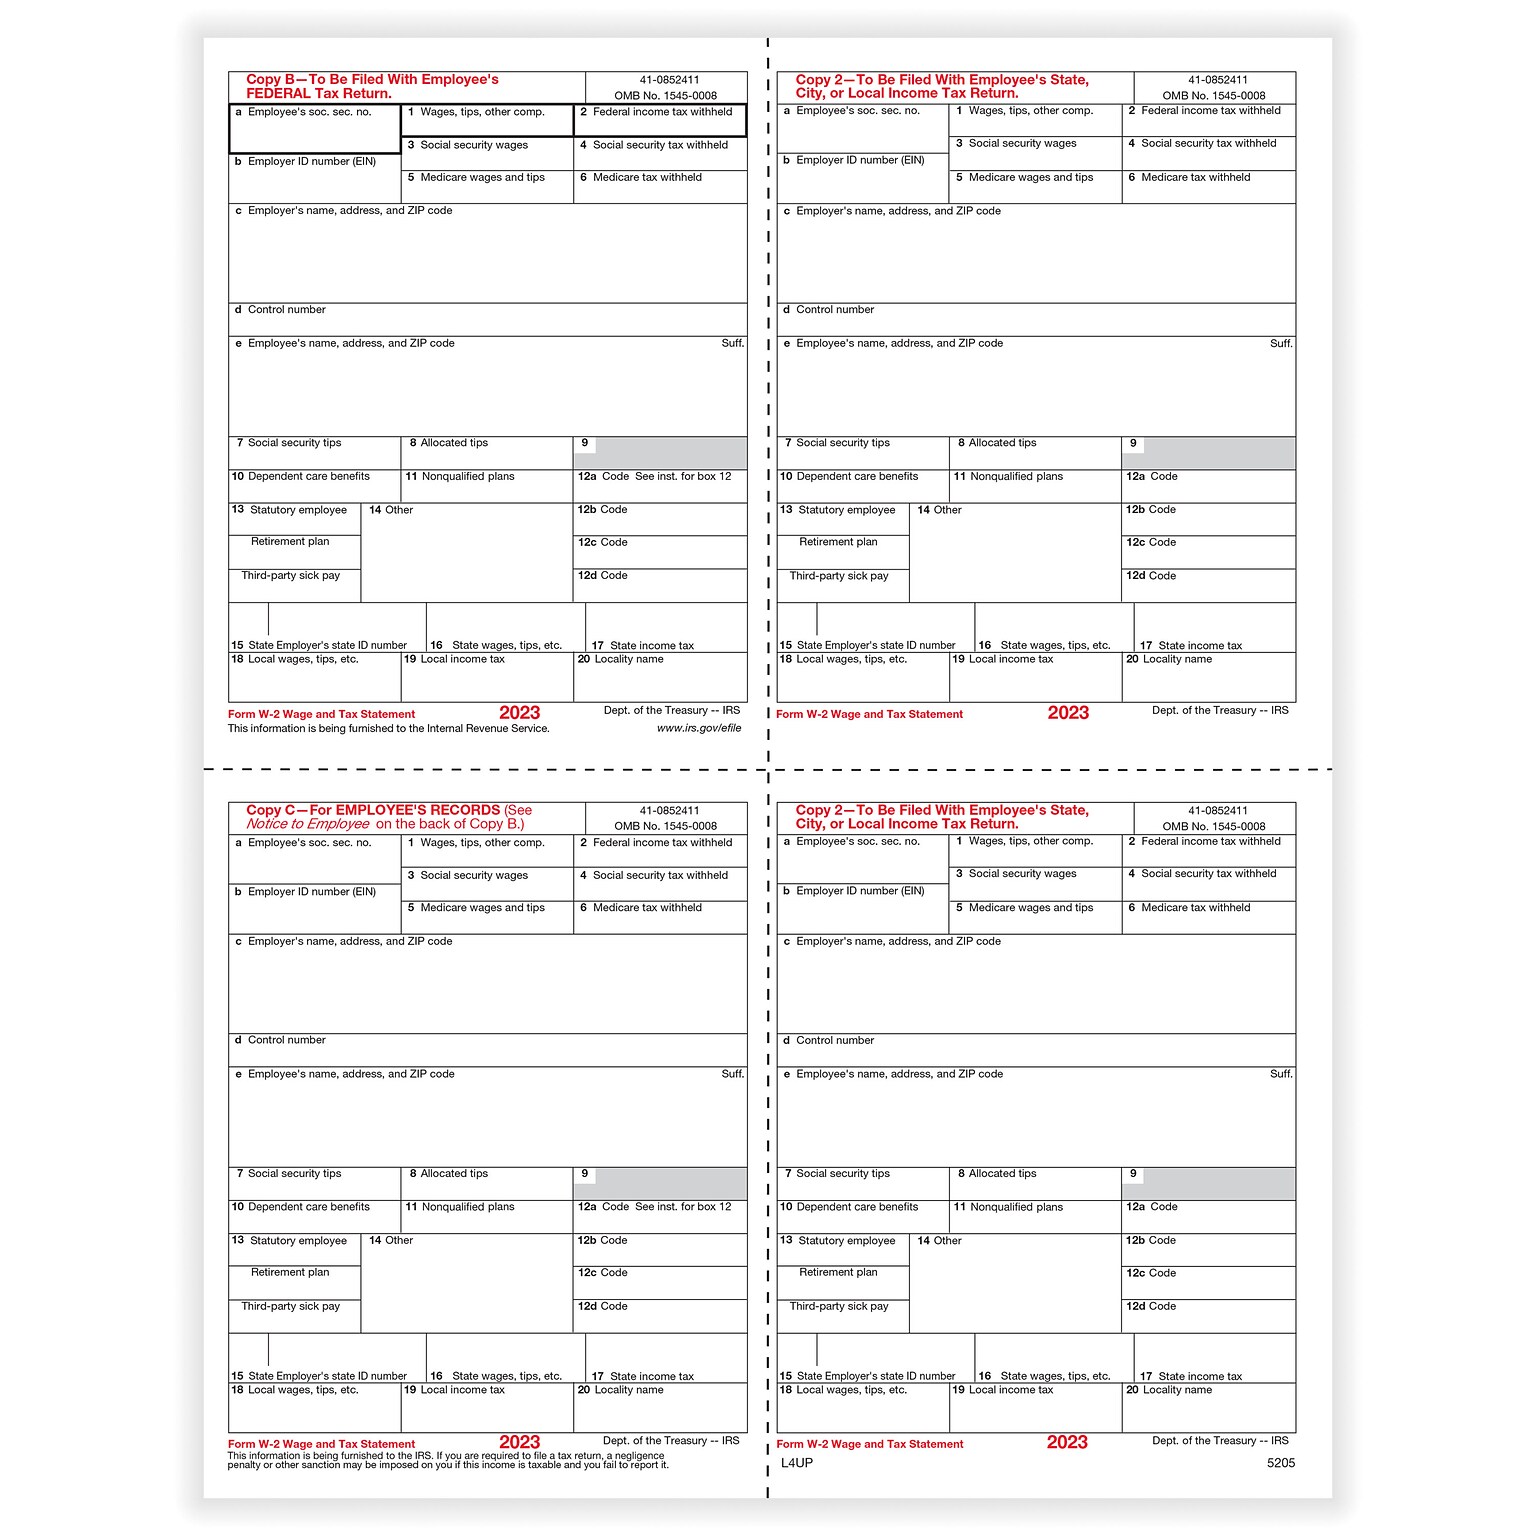 ComplyRight 2023 W-2 Tax Form, 1-Part, 4-Up, Copy B, C, 2, 2, 100/Pack (5205)